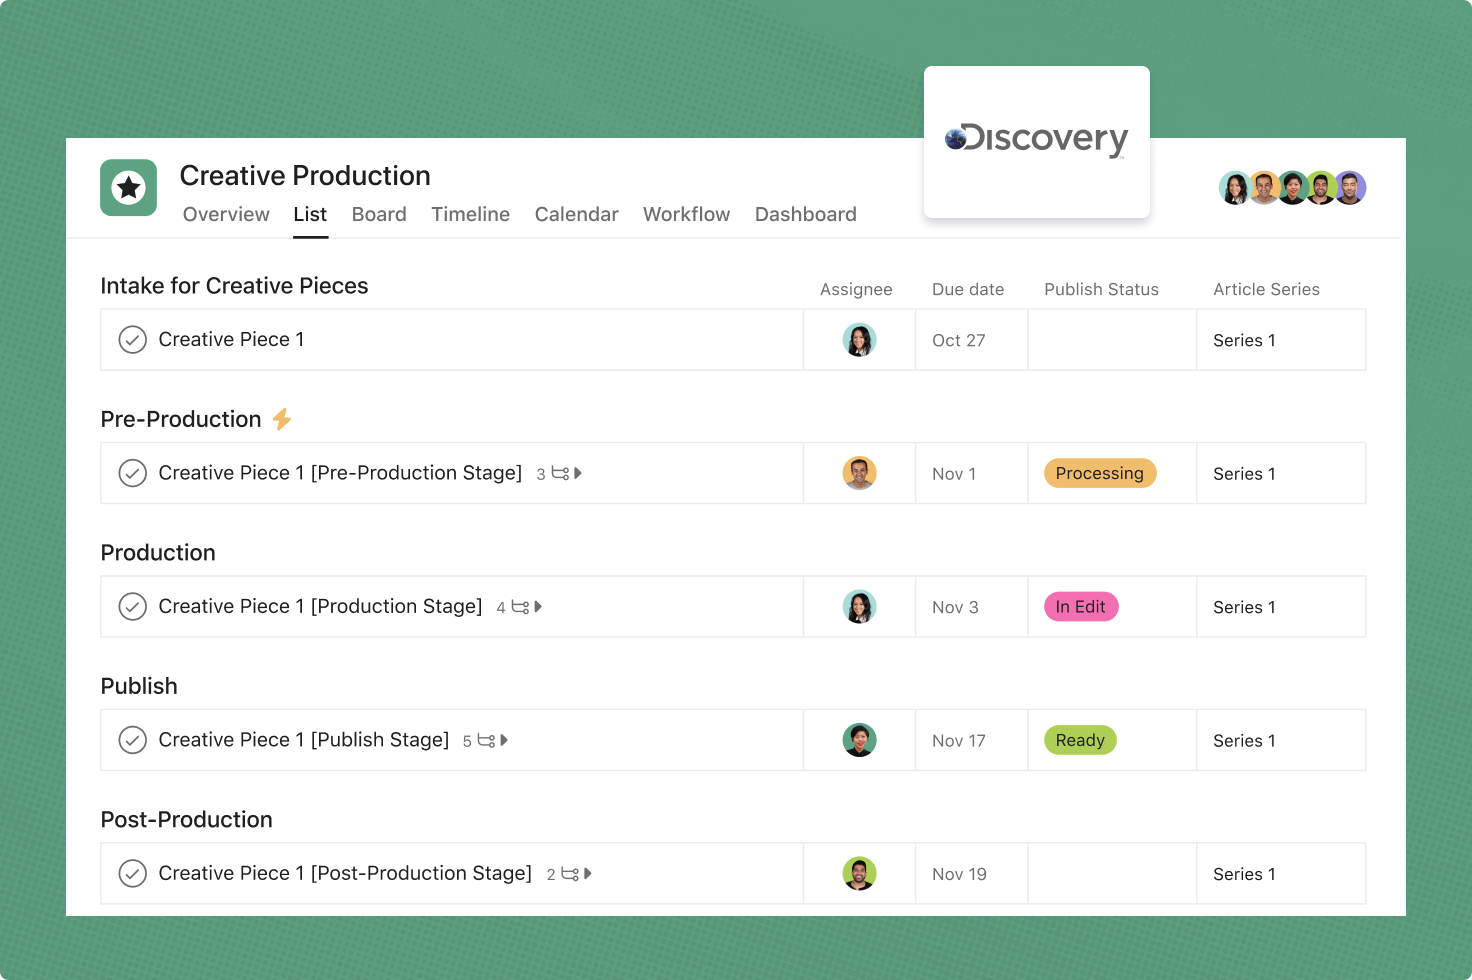 Discovery Inc uses Asana for their creative production workflow